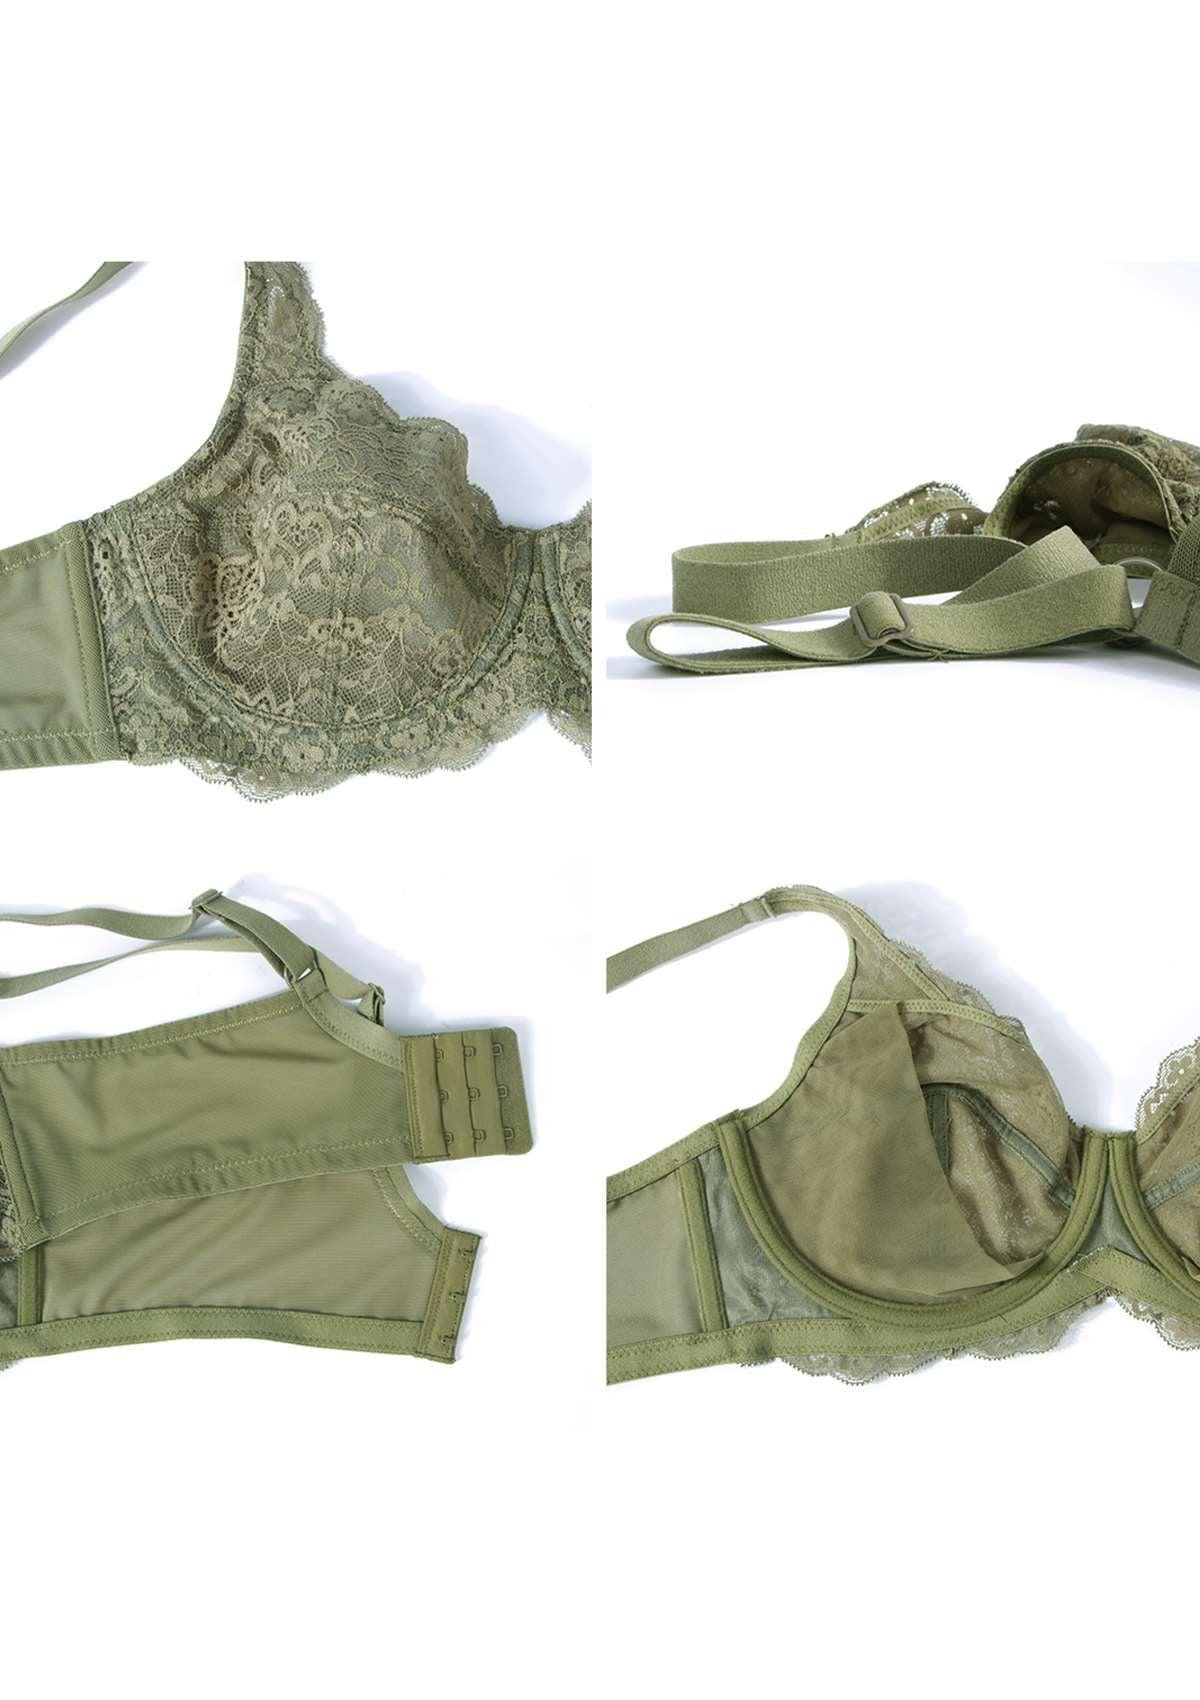 HSIA All-Over Floral Lace Unlined Bra: Minimizer Bra For Heavy Breasts - Dark Green / 40 / D